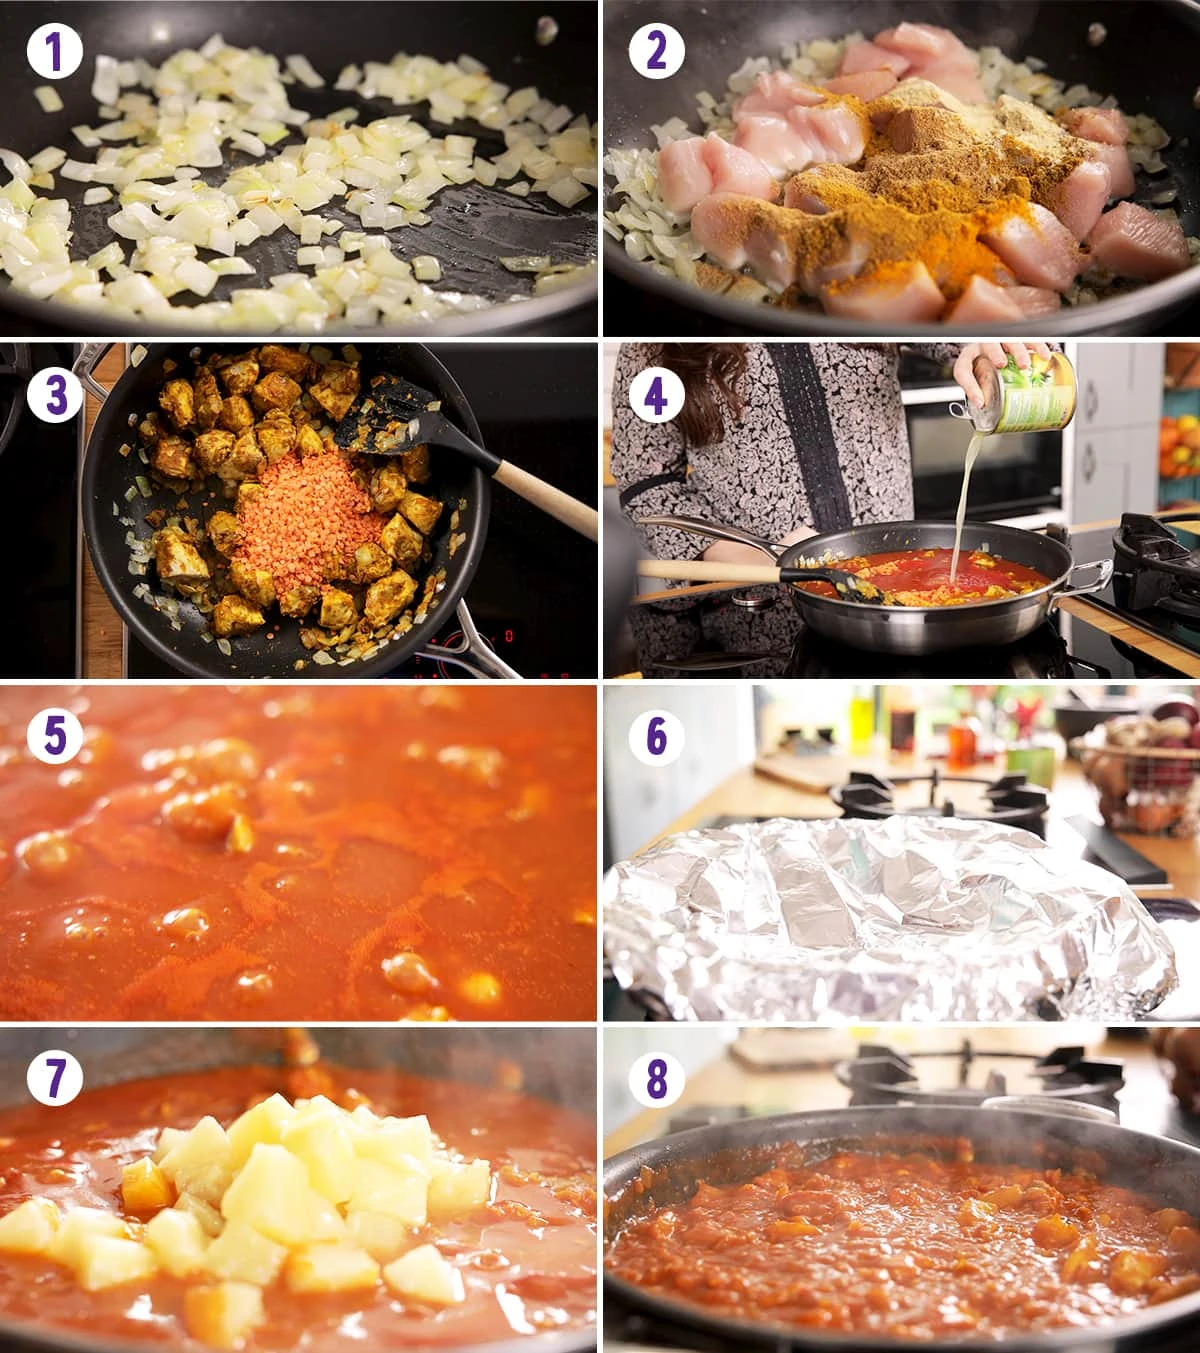 8 image collage showing how to make chicken dhansak